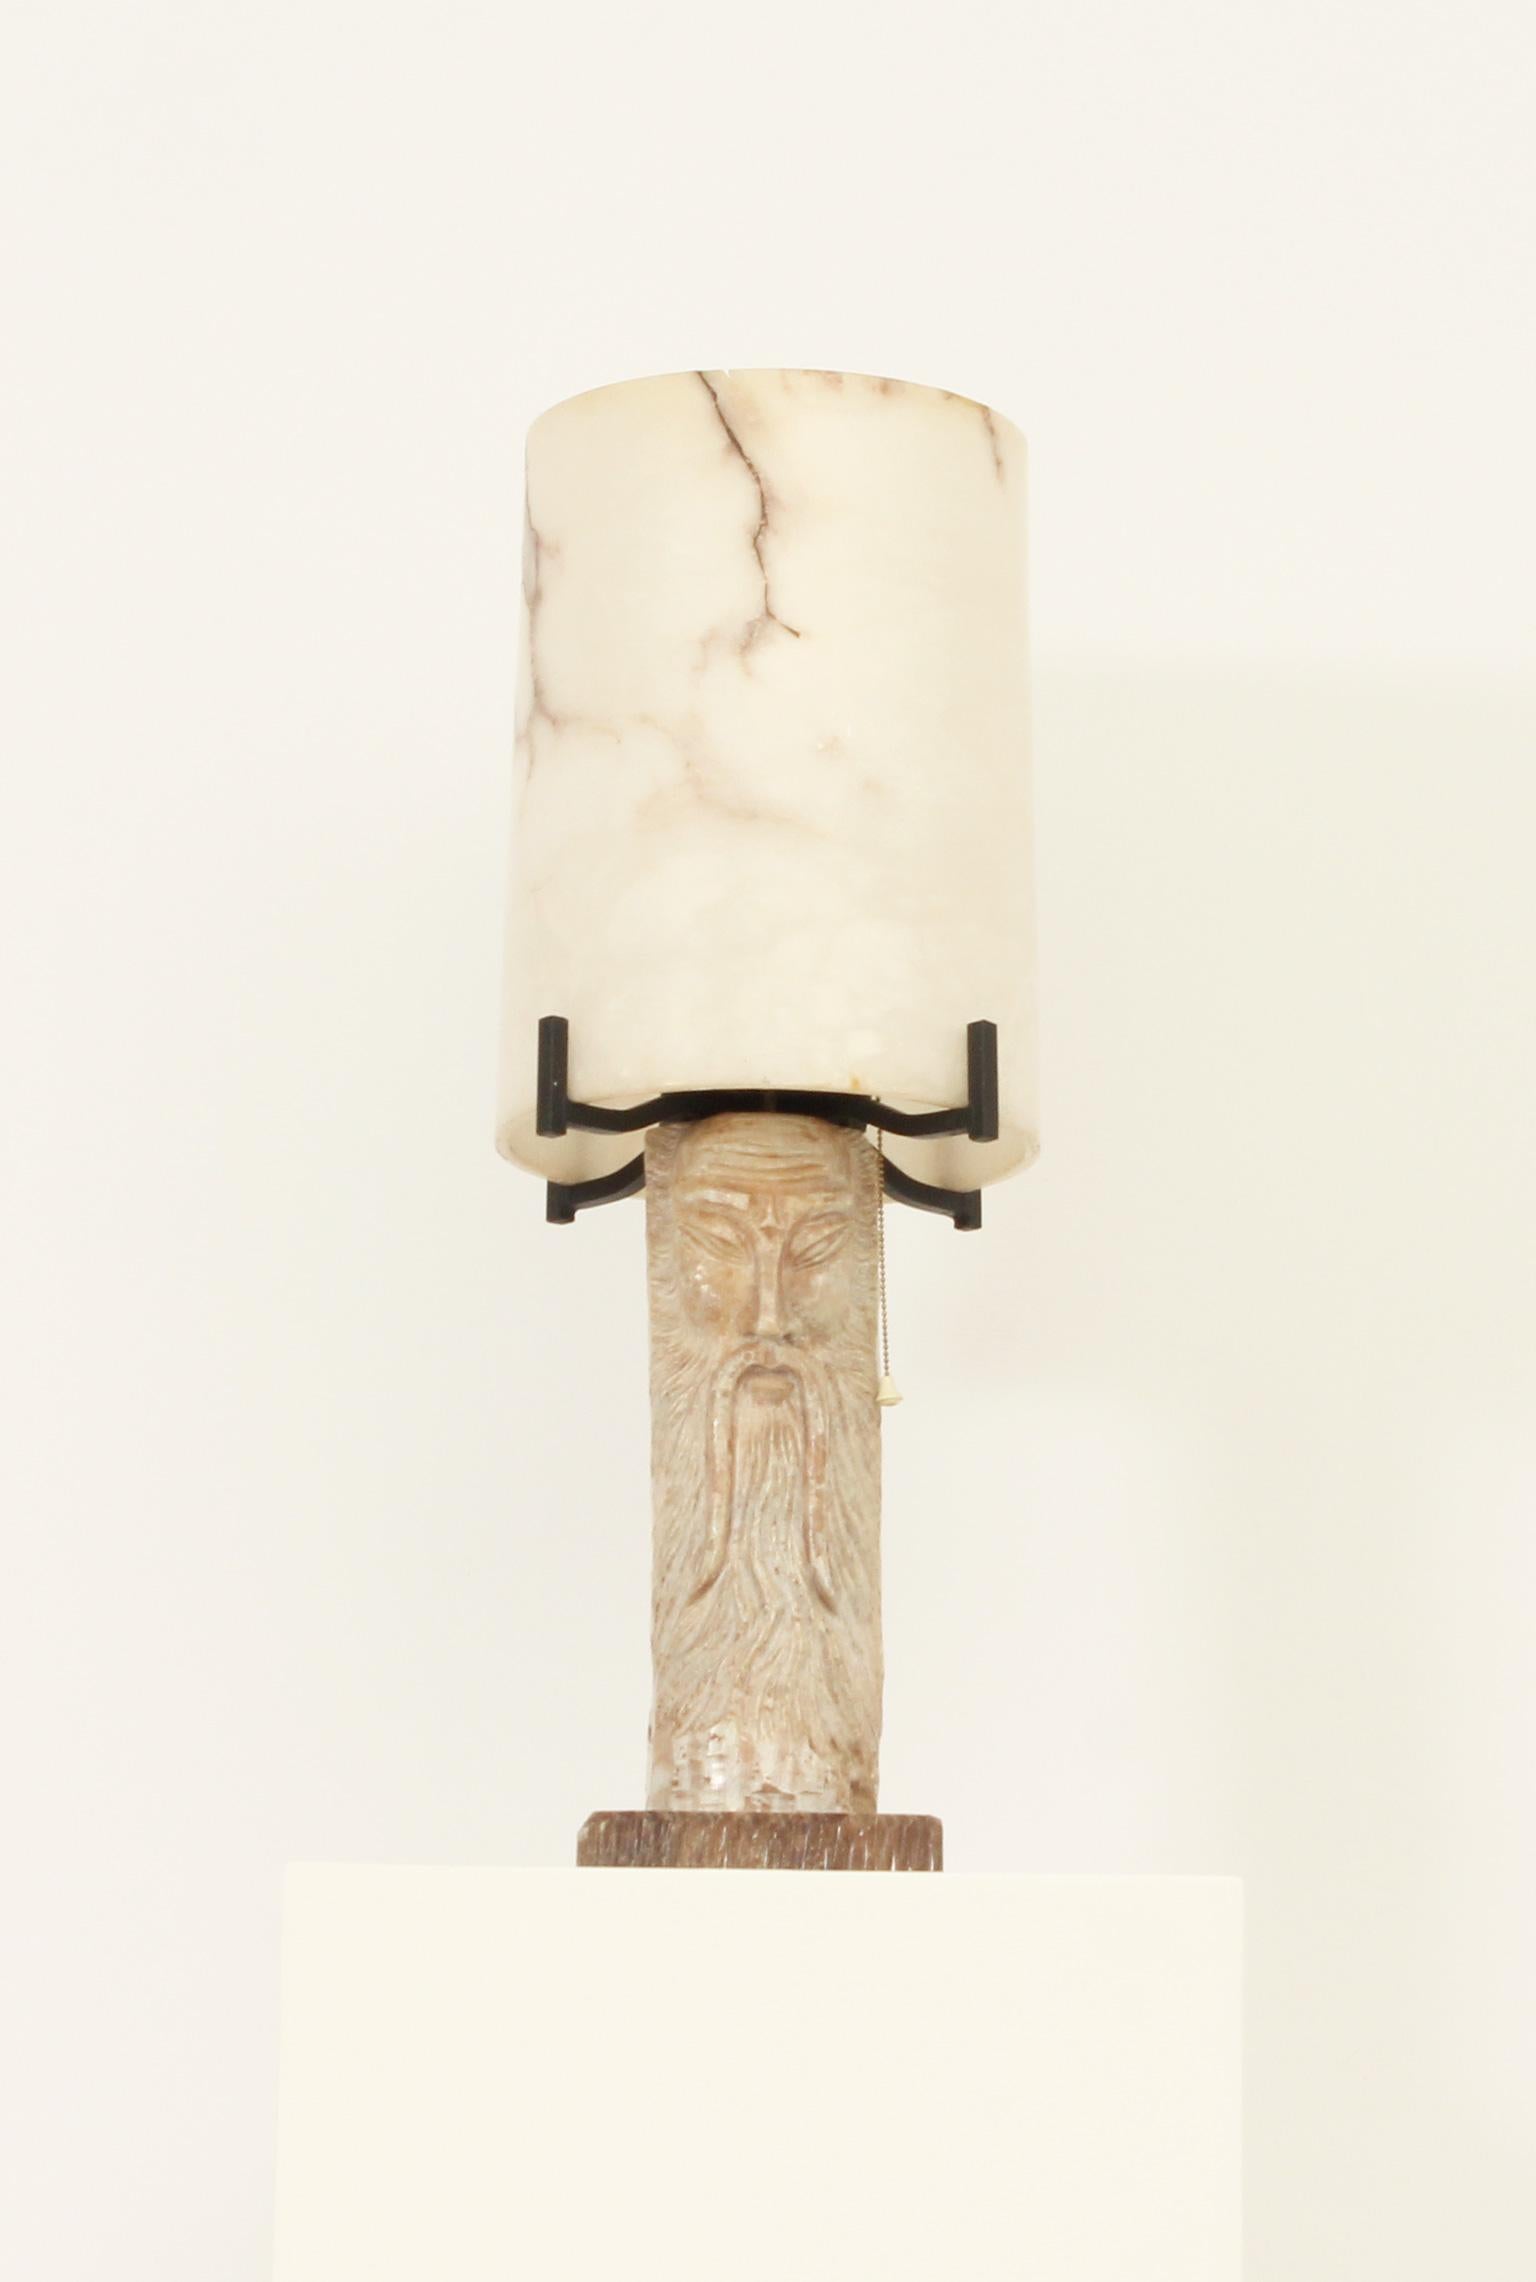 Large alabaster table lamp from 1950's, Spain. Composed of two parts of carved alabaster  and stone base with black forged iron. Interesting lighting effect when the lamp is on.